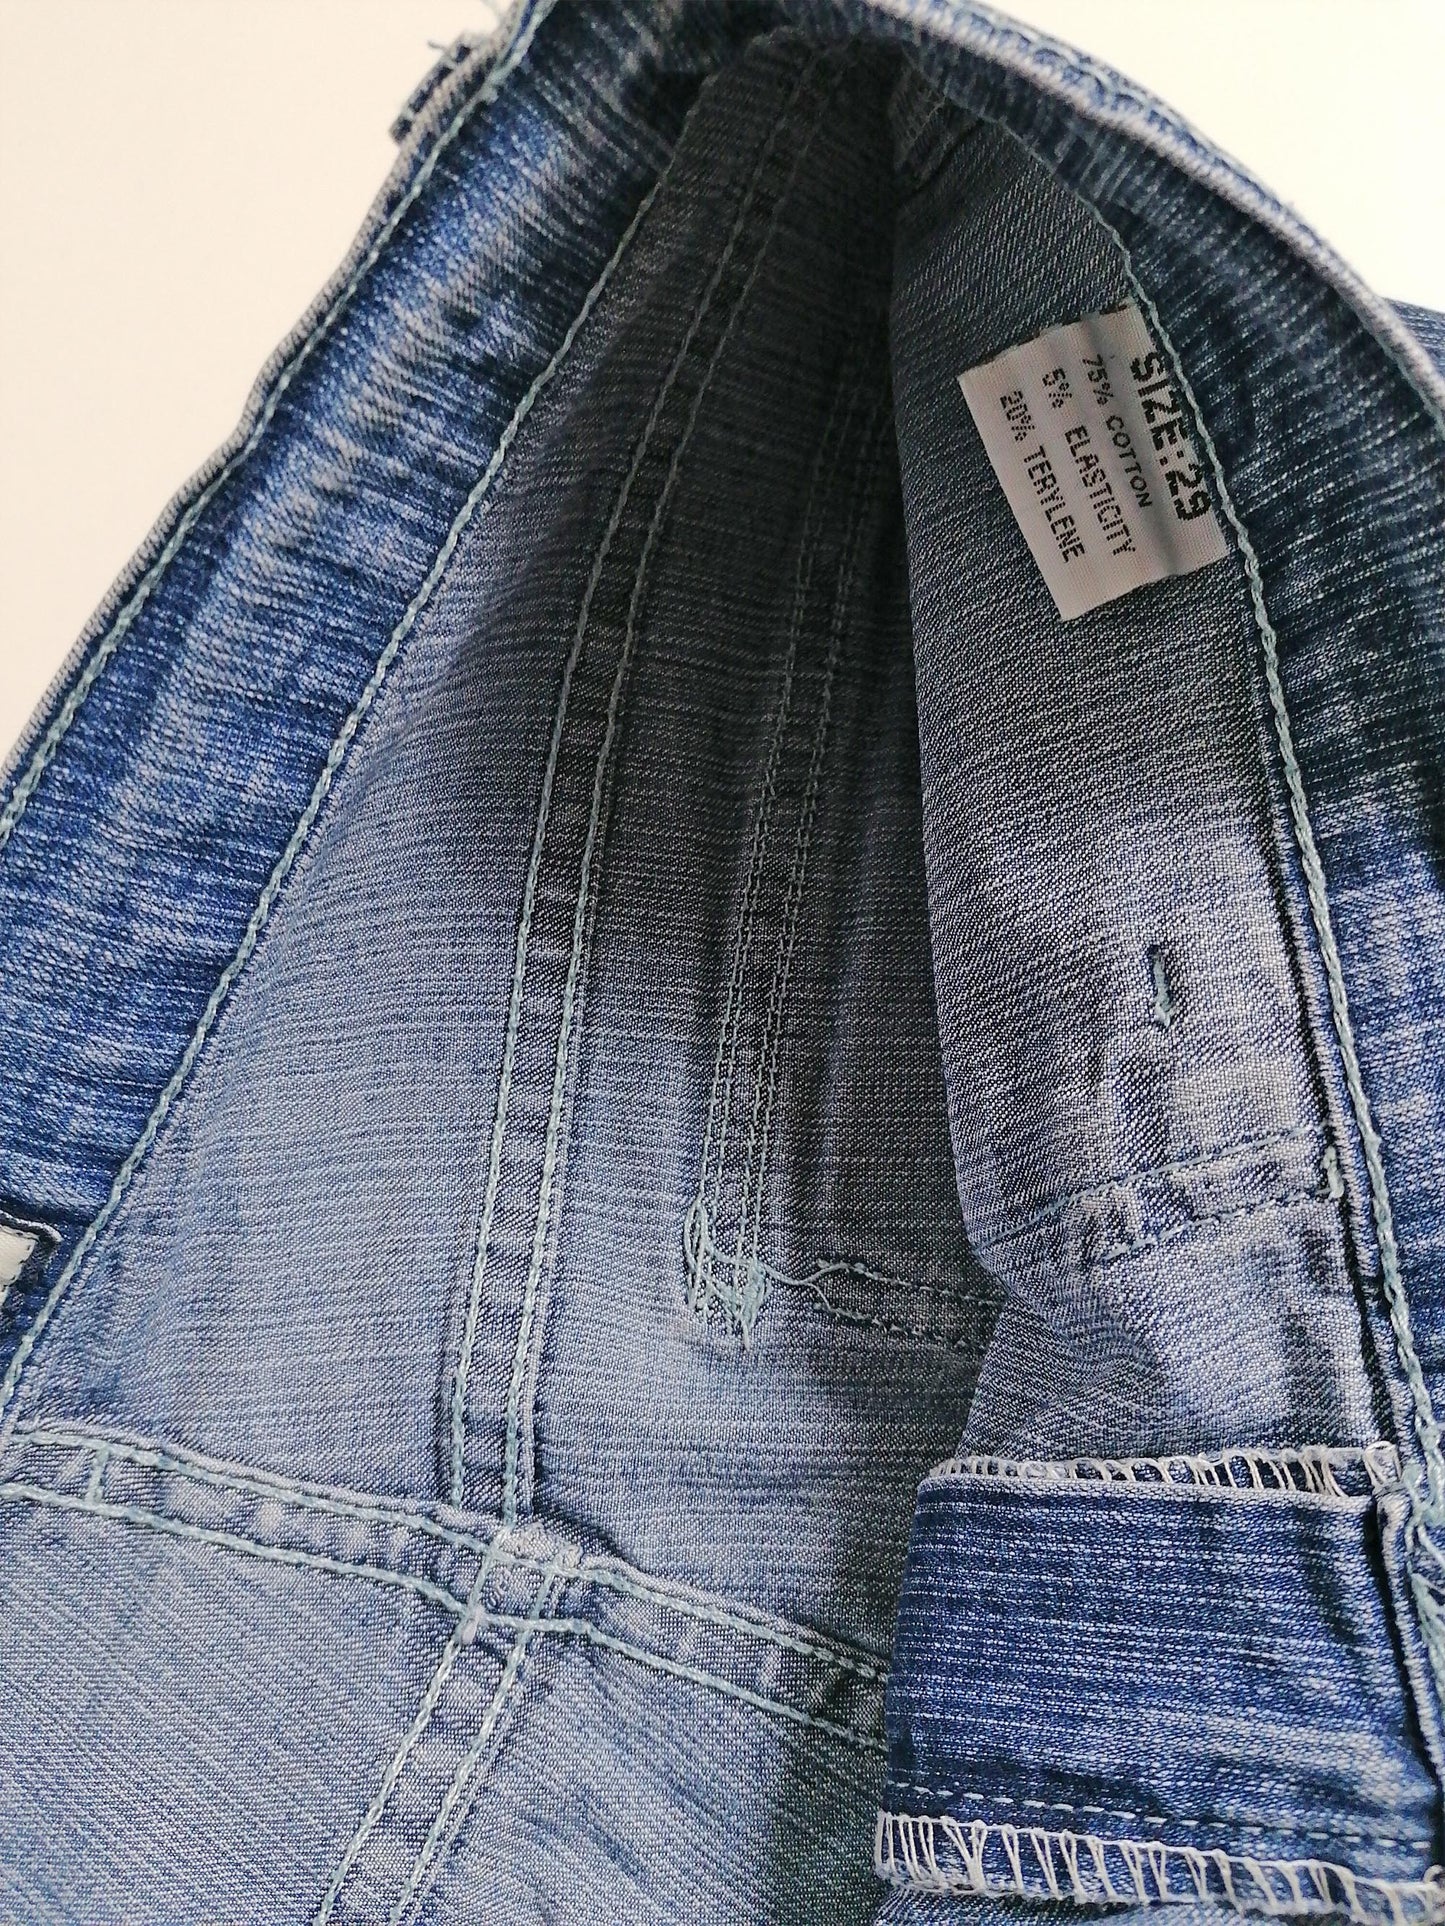 Vintage 90's Low-Rise Flared Cargo Jeans - size M